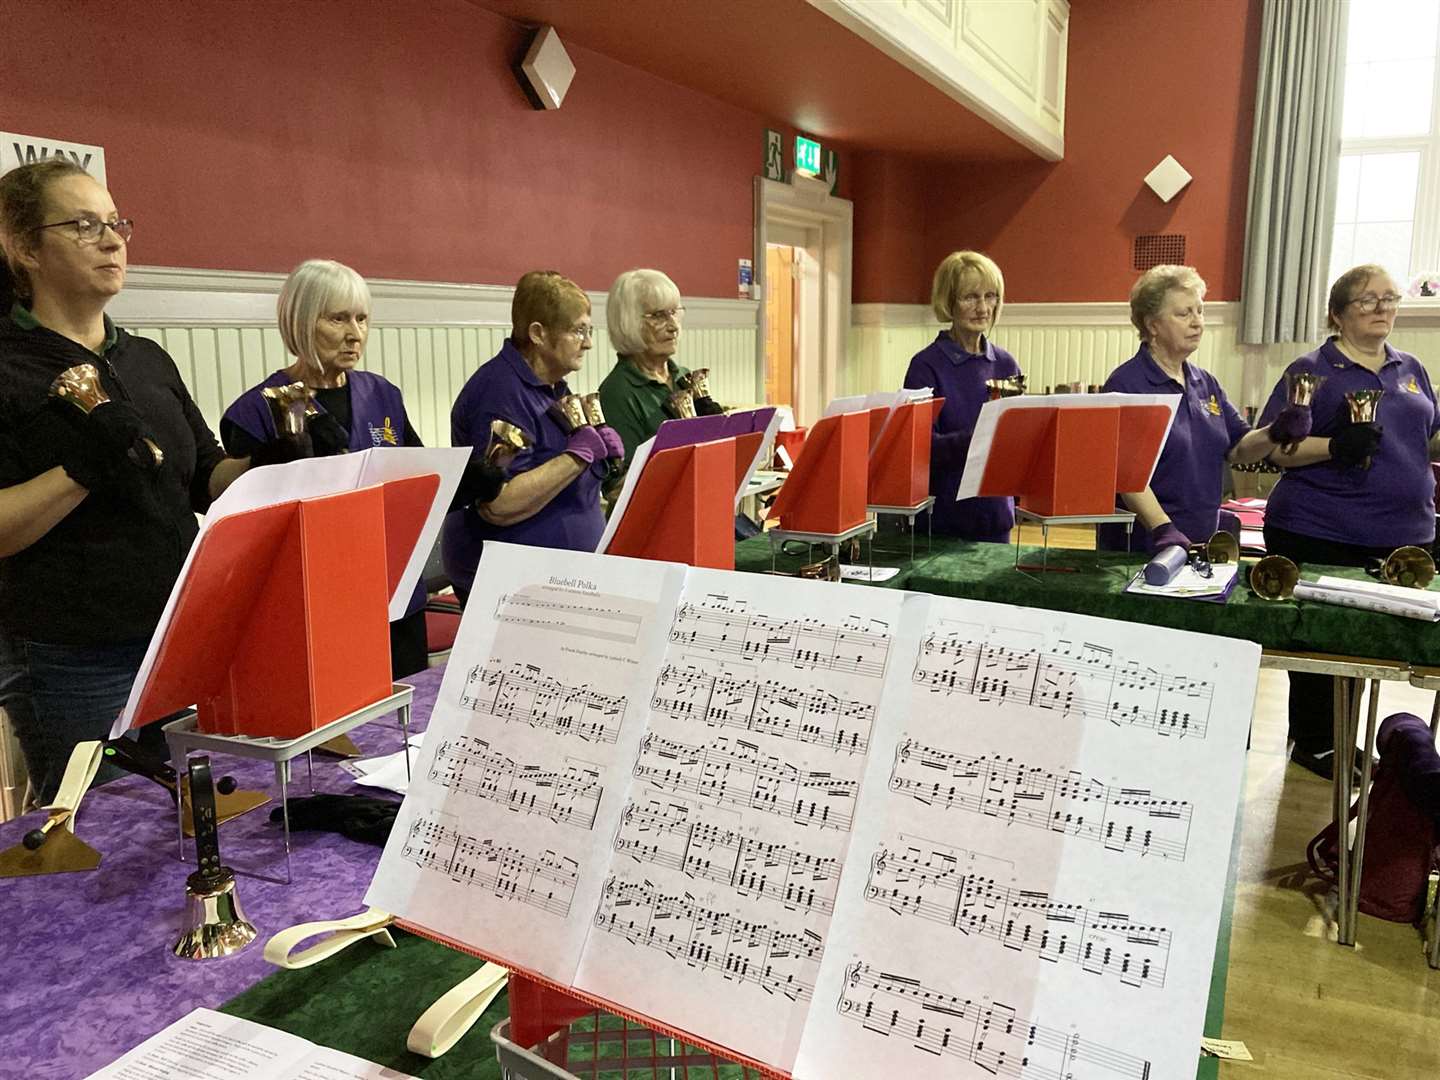 The Scottish Spring Rally will be hosted jointly by the Poltney Bell Ringers and Caithness Handbell Ringers.